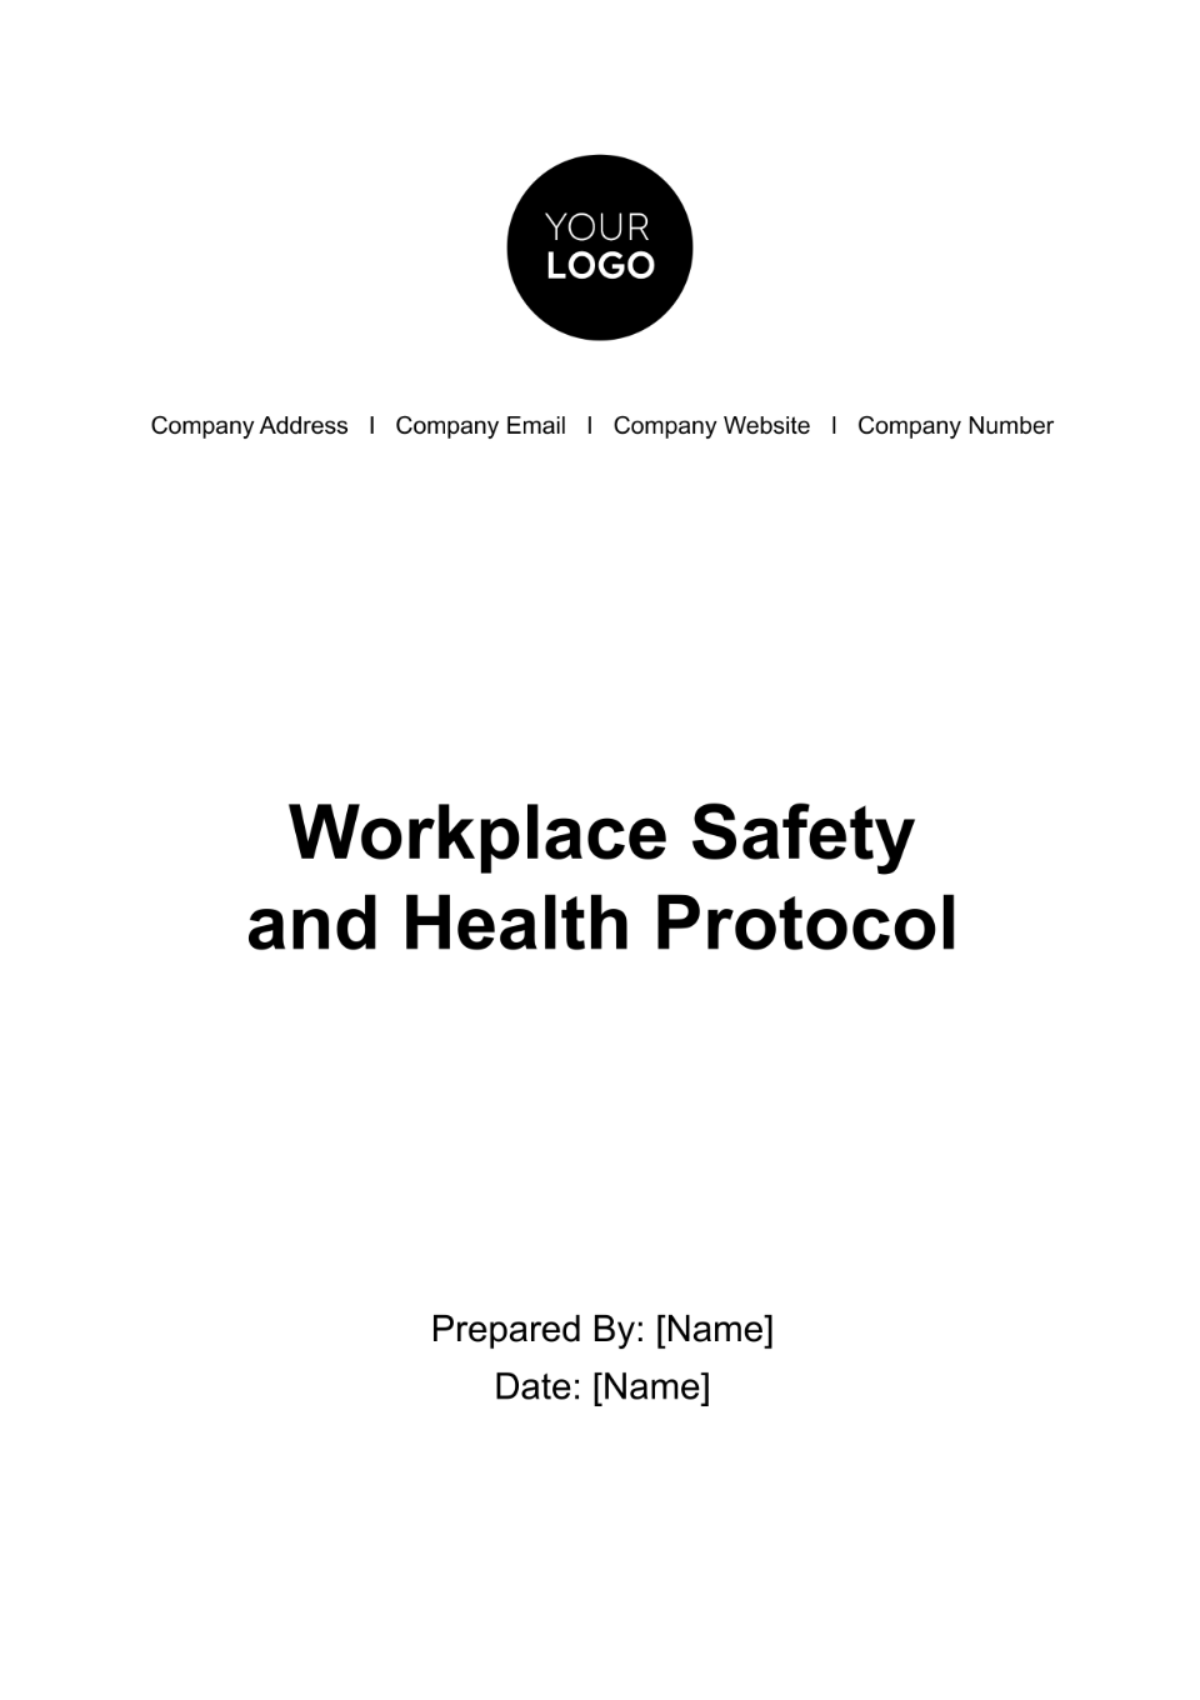 Free Workplace Safety and Health Protocol HR Template